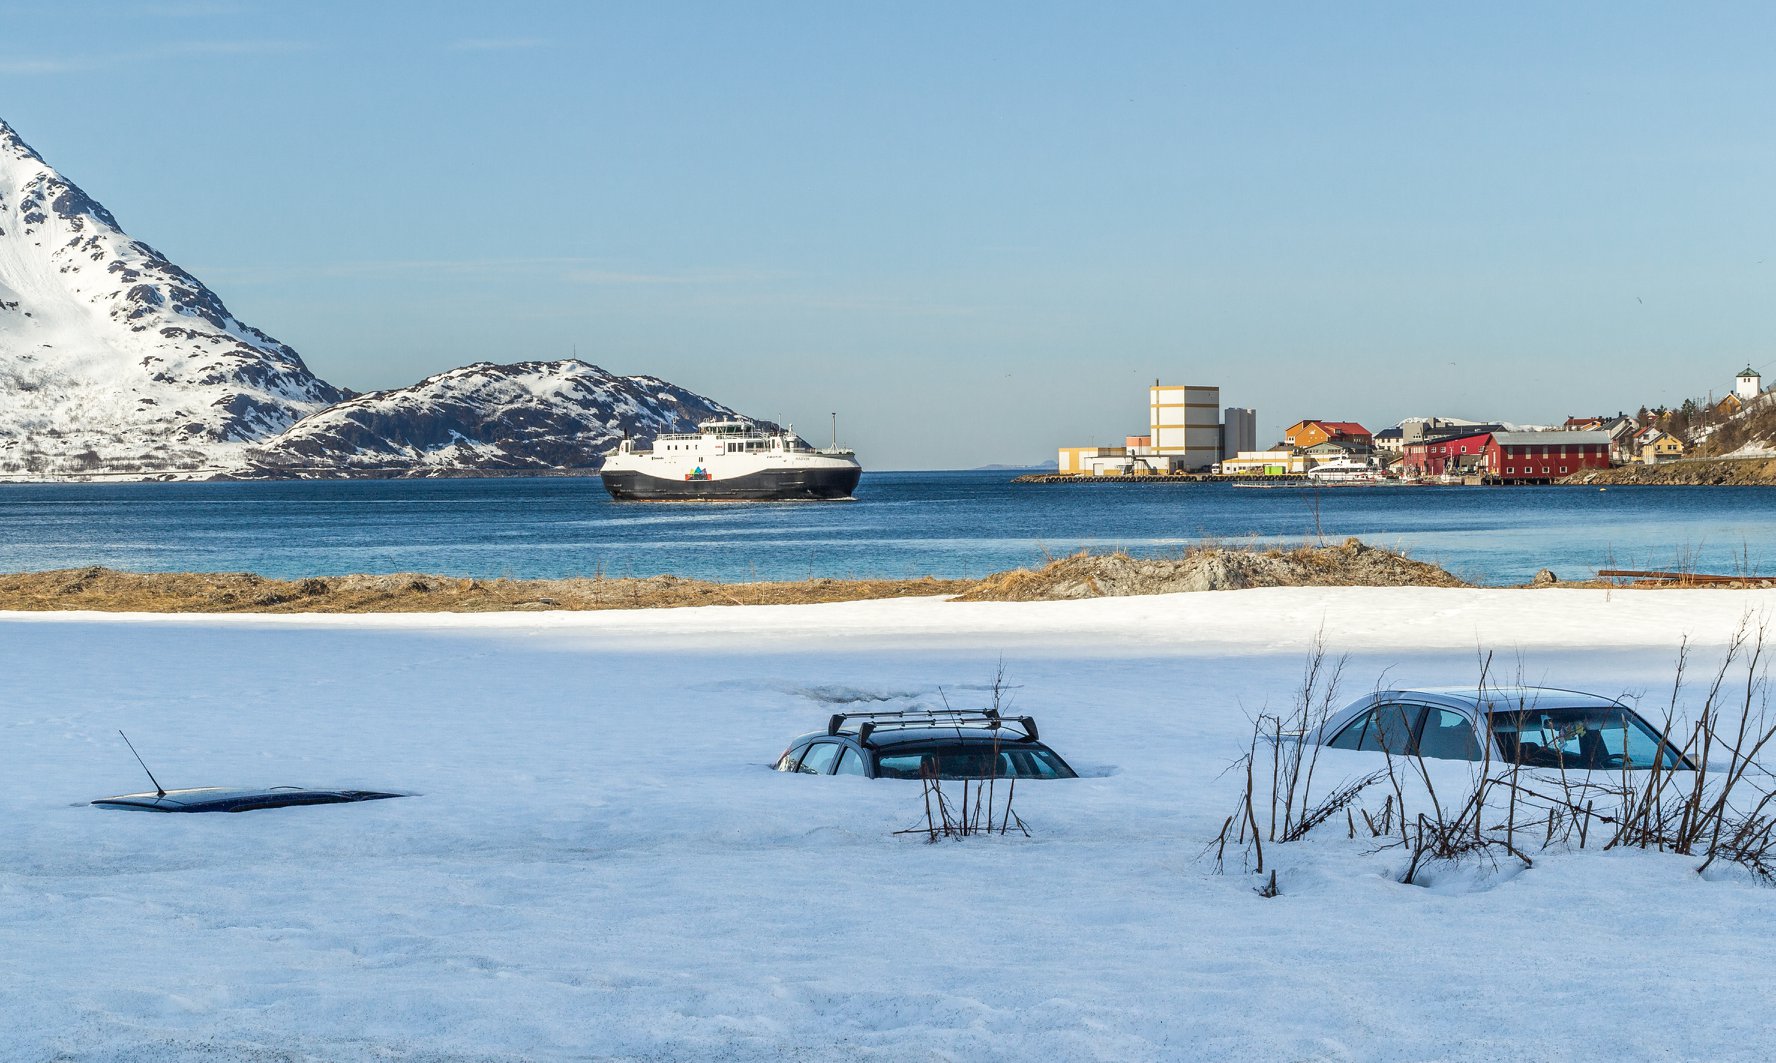 Signs of spring in Ã˜ksfjord, Norway. The cars are beginning to show up again.